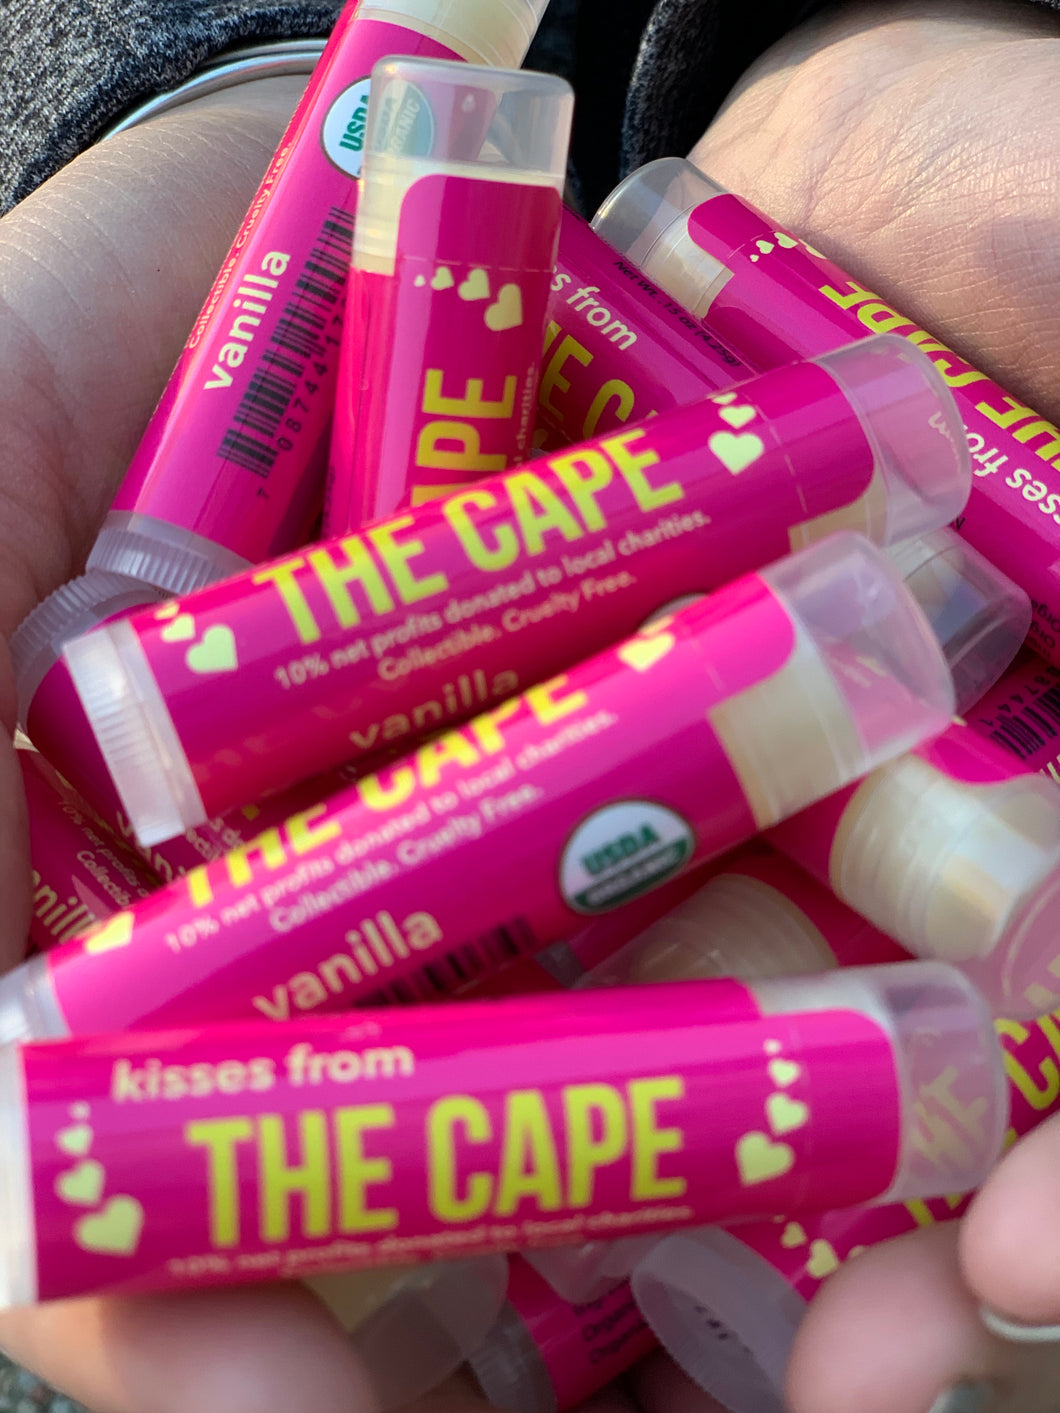 Kisses from the Cape lip balm